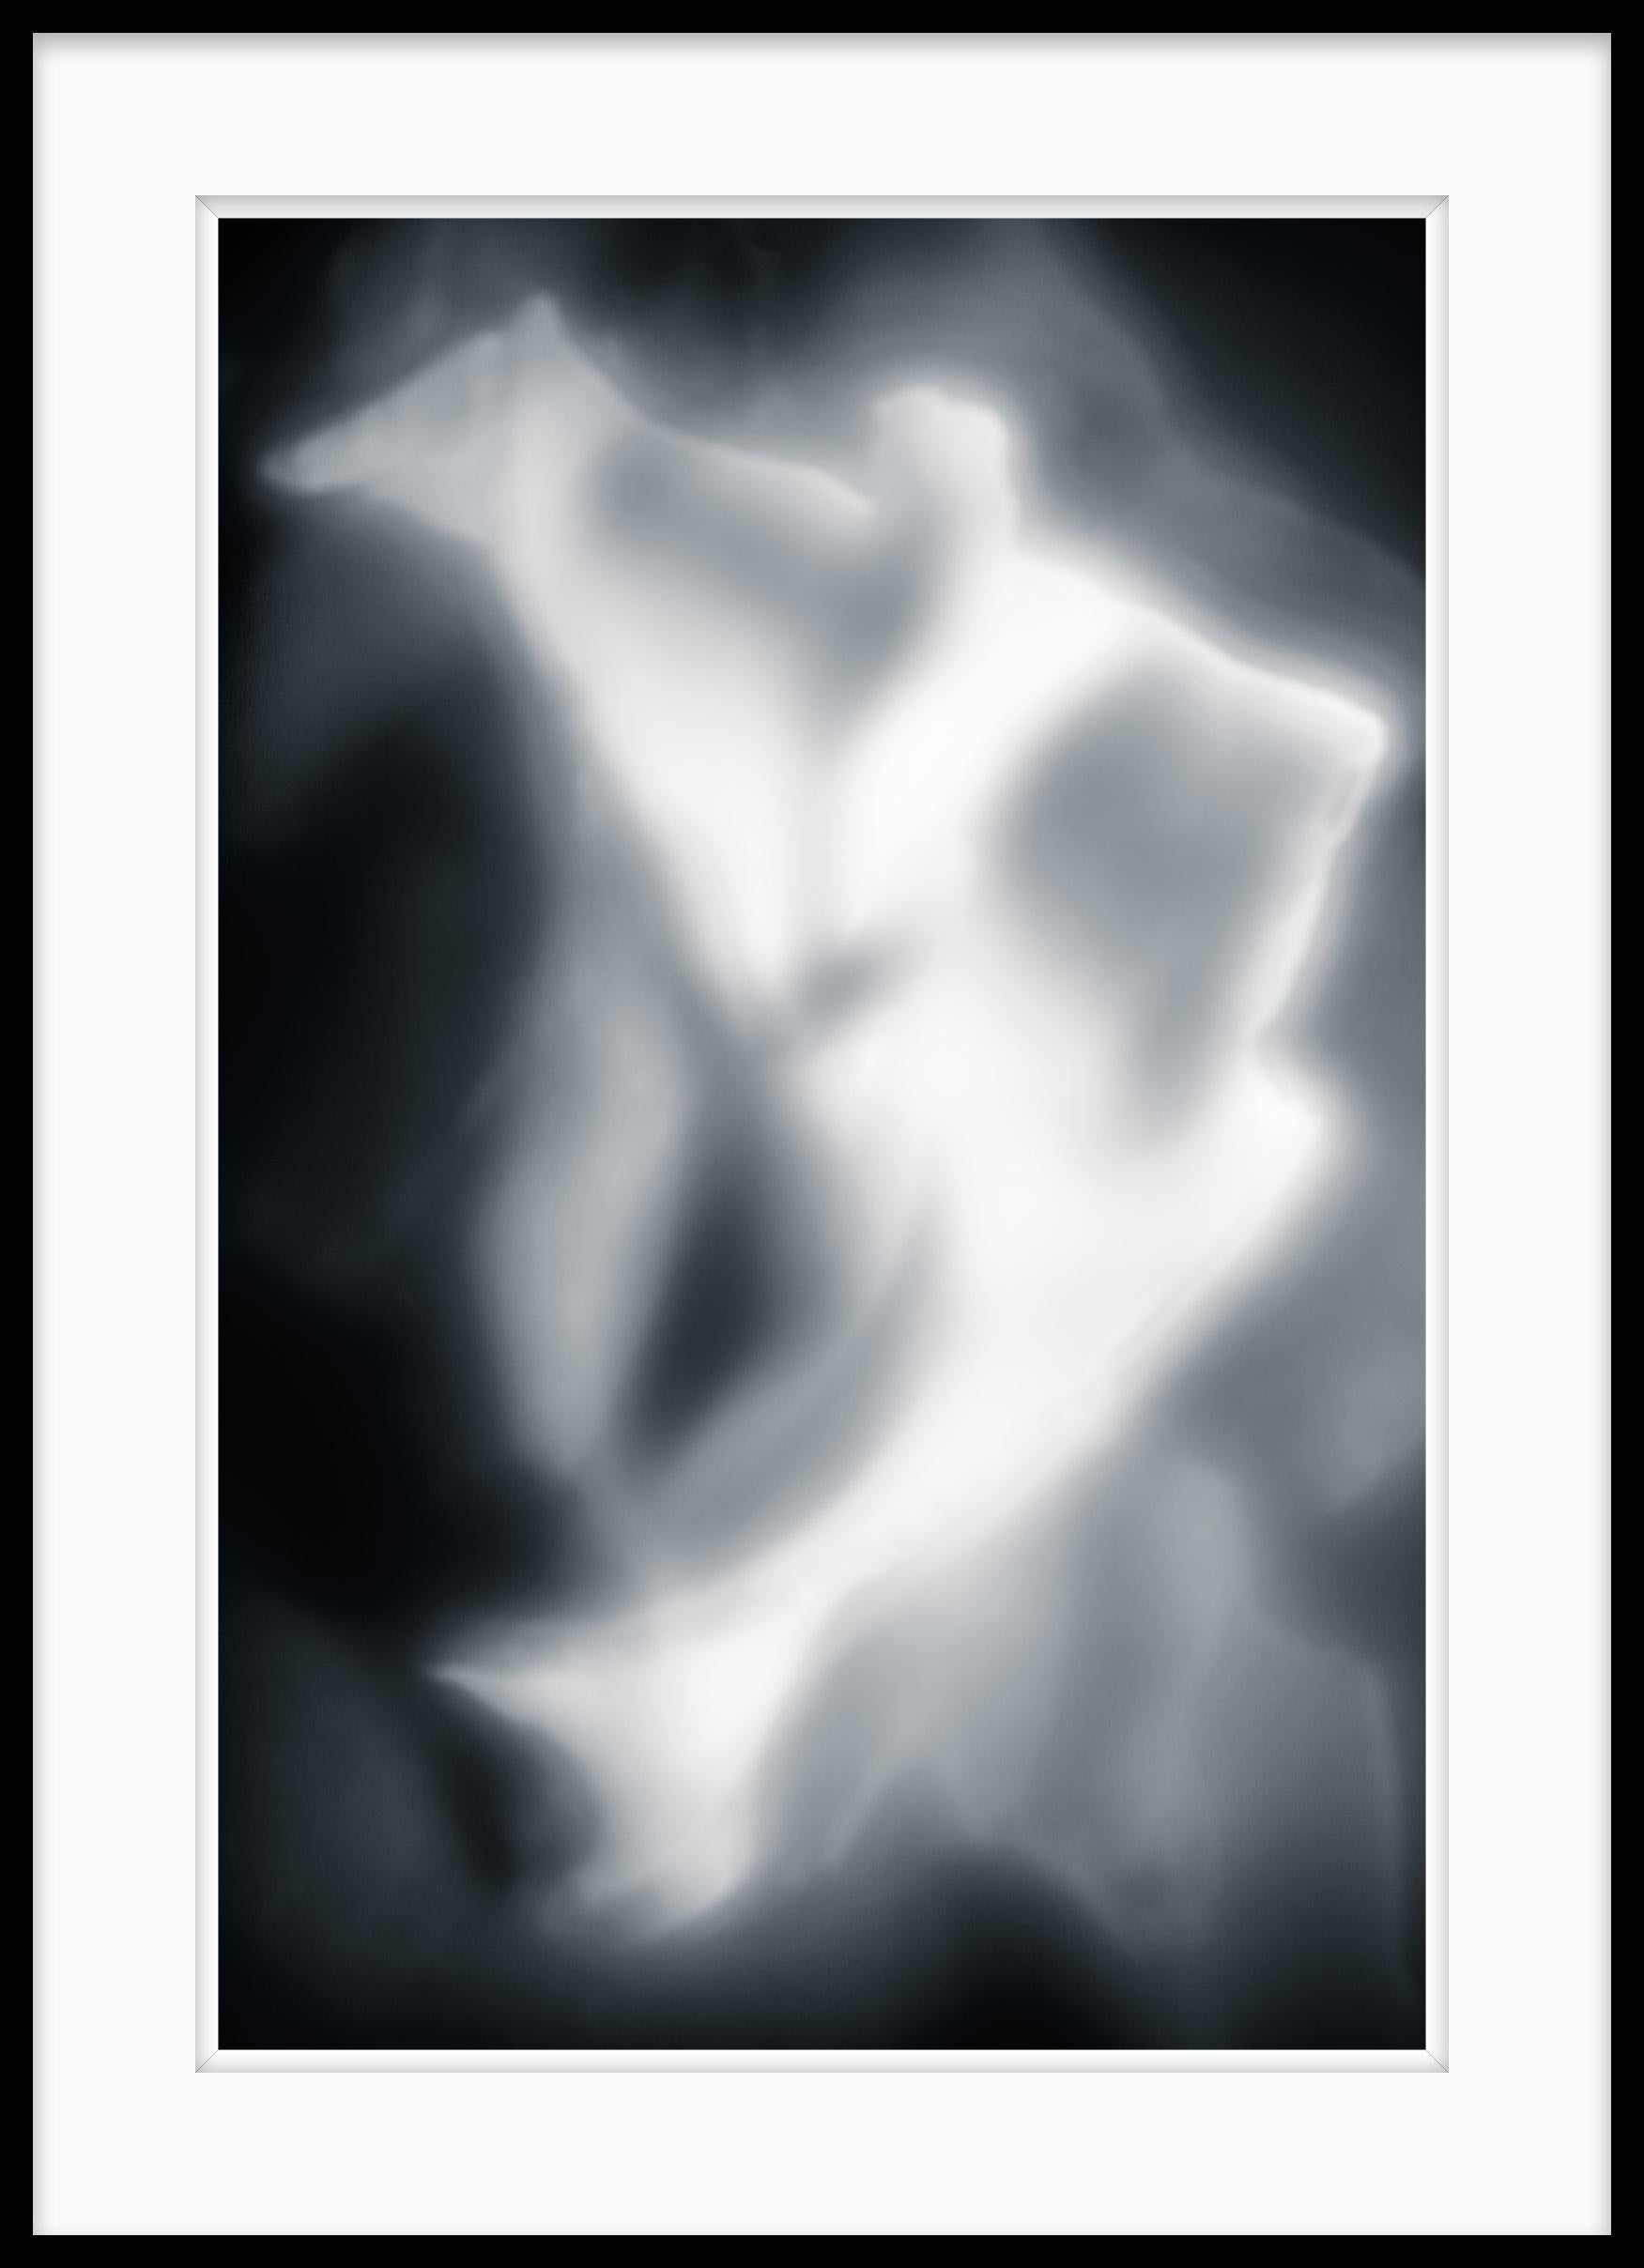 Limited Edition Abstract Black and White Photograph - Moments of Evolution #21

Moments of Evolution explores the transformations of organic forms as they evolve into an endless array of ethereal configurations.

The subjects float, shifting scale,